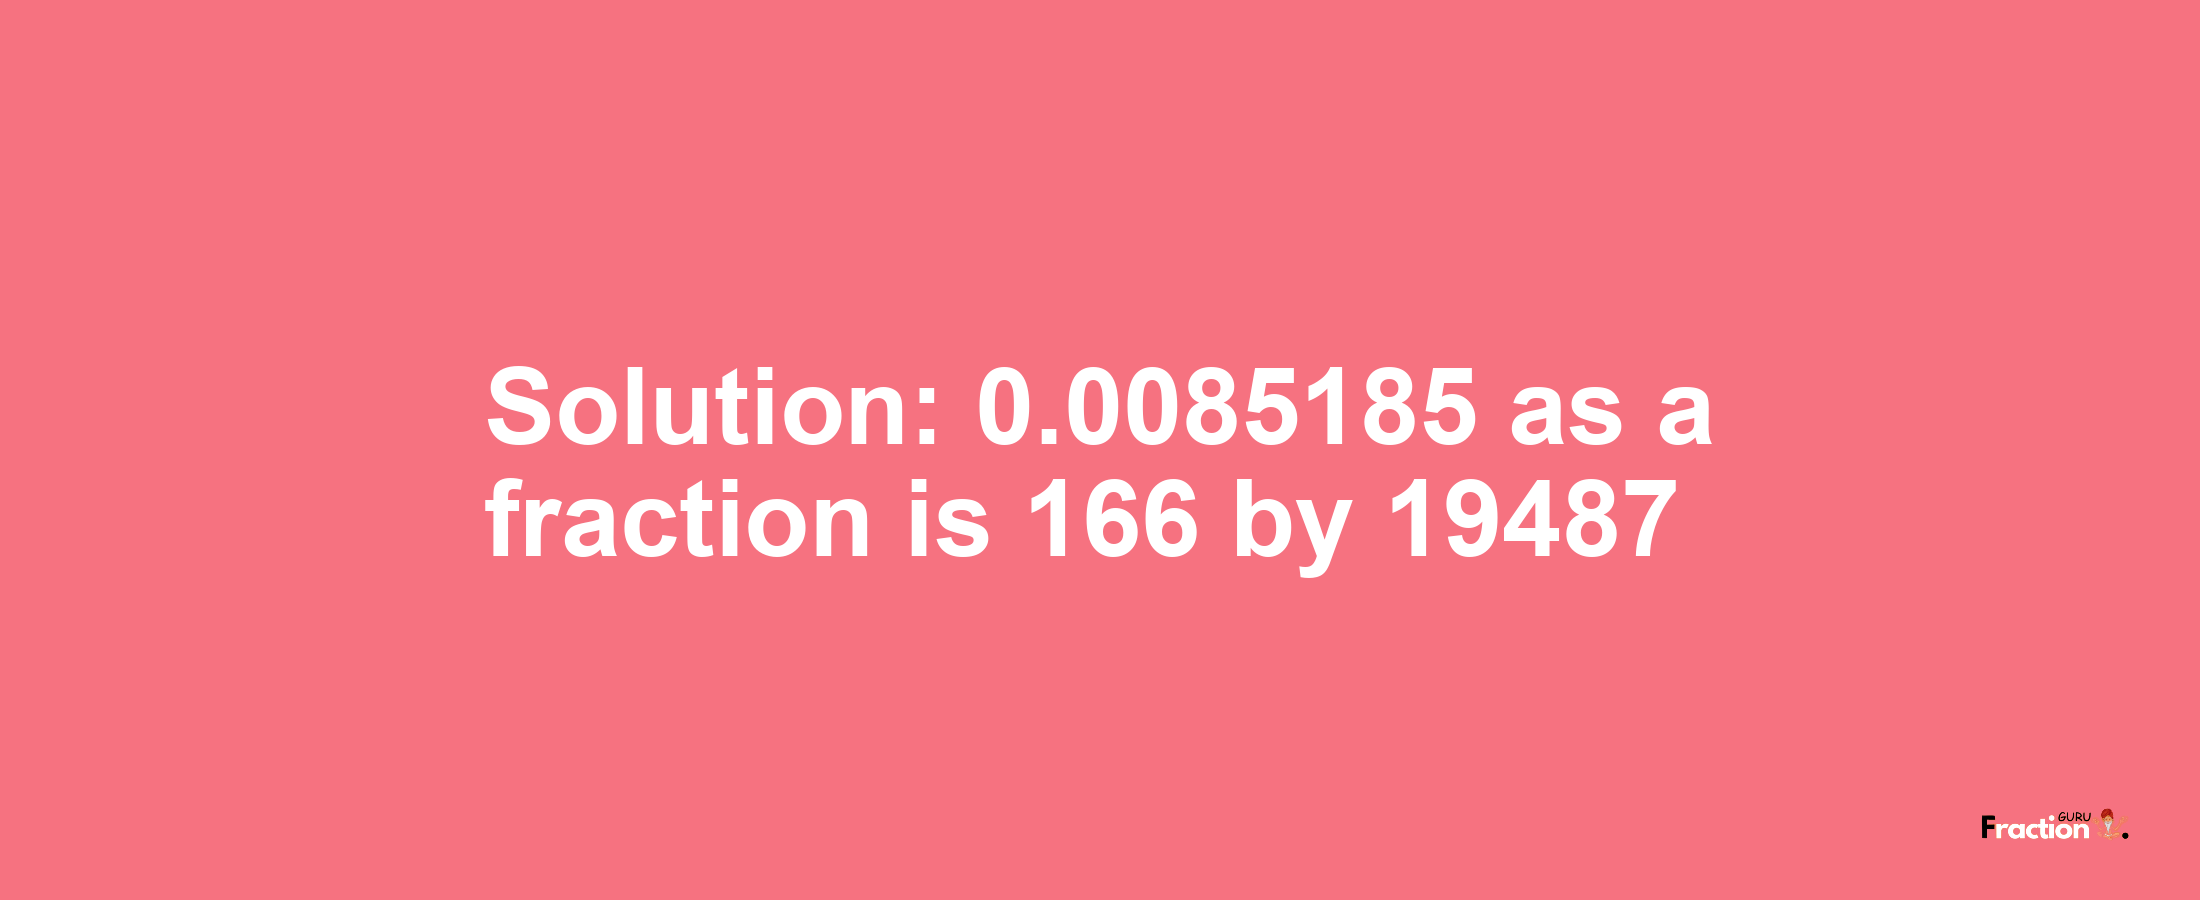 Solution:0.0085185 as a fraction is 166/19487